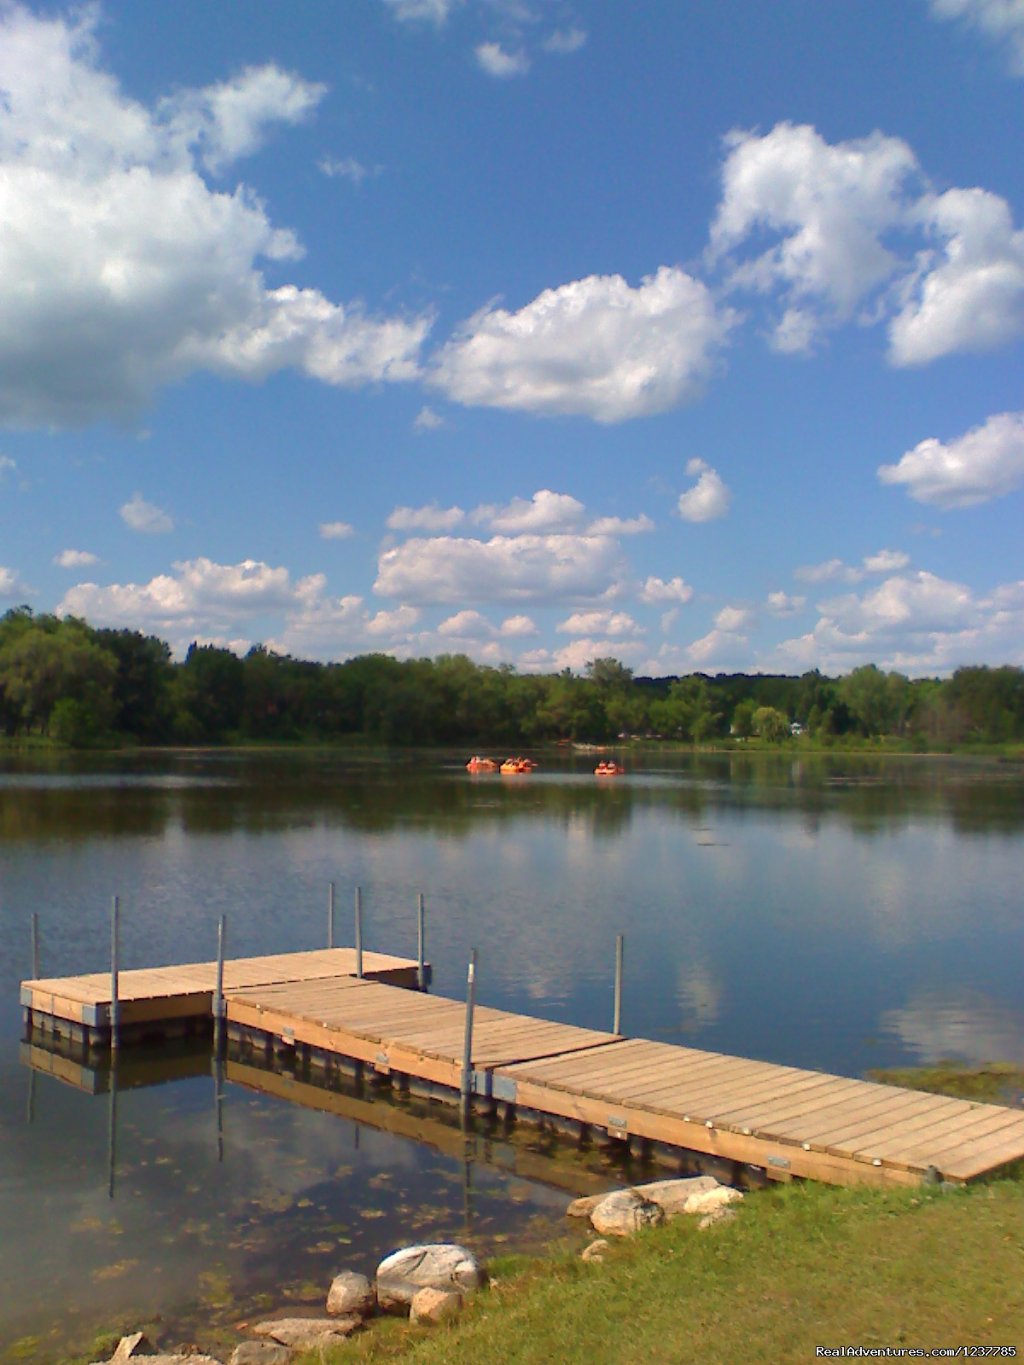 Five fishing piers | Indian Trails Campground | Image #19/19 | 